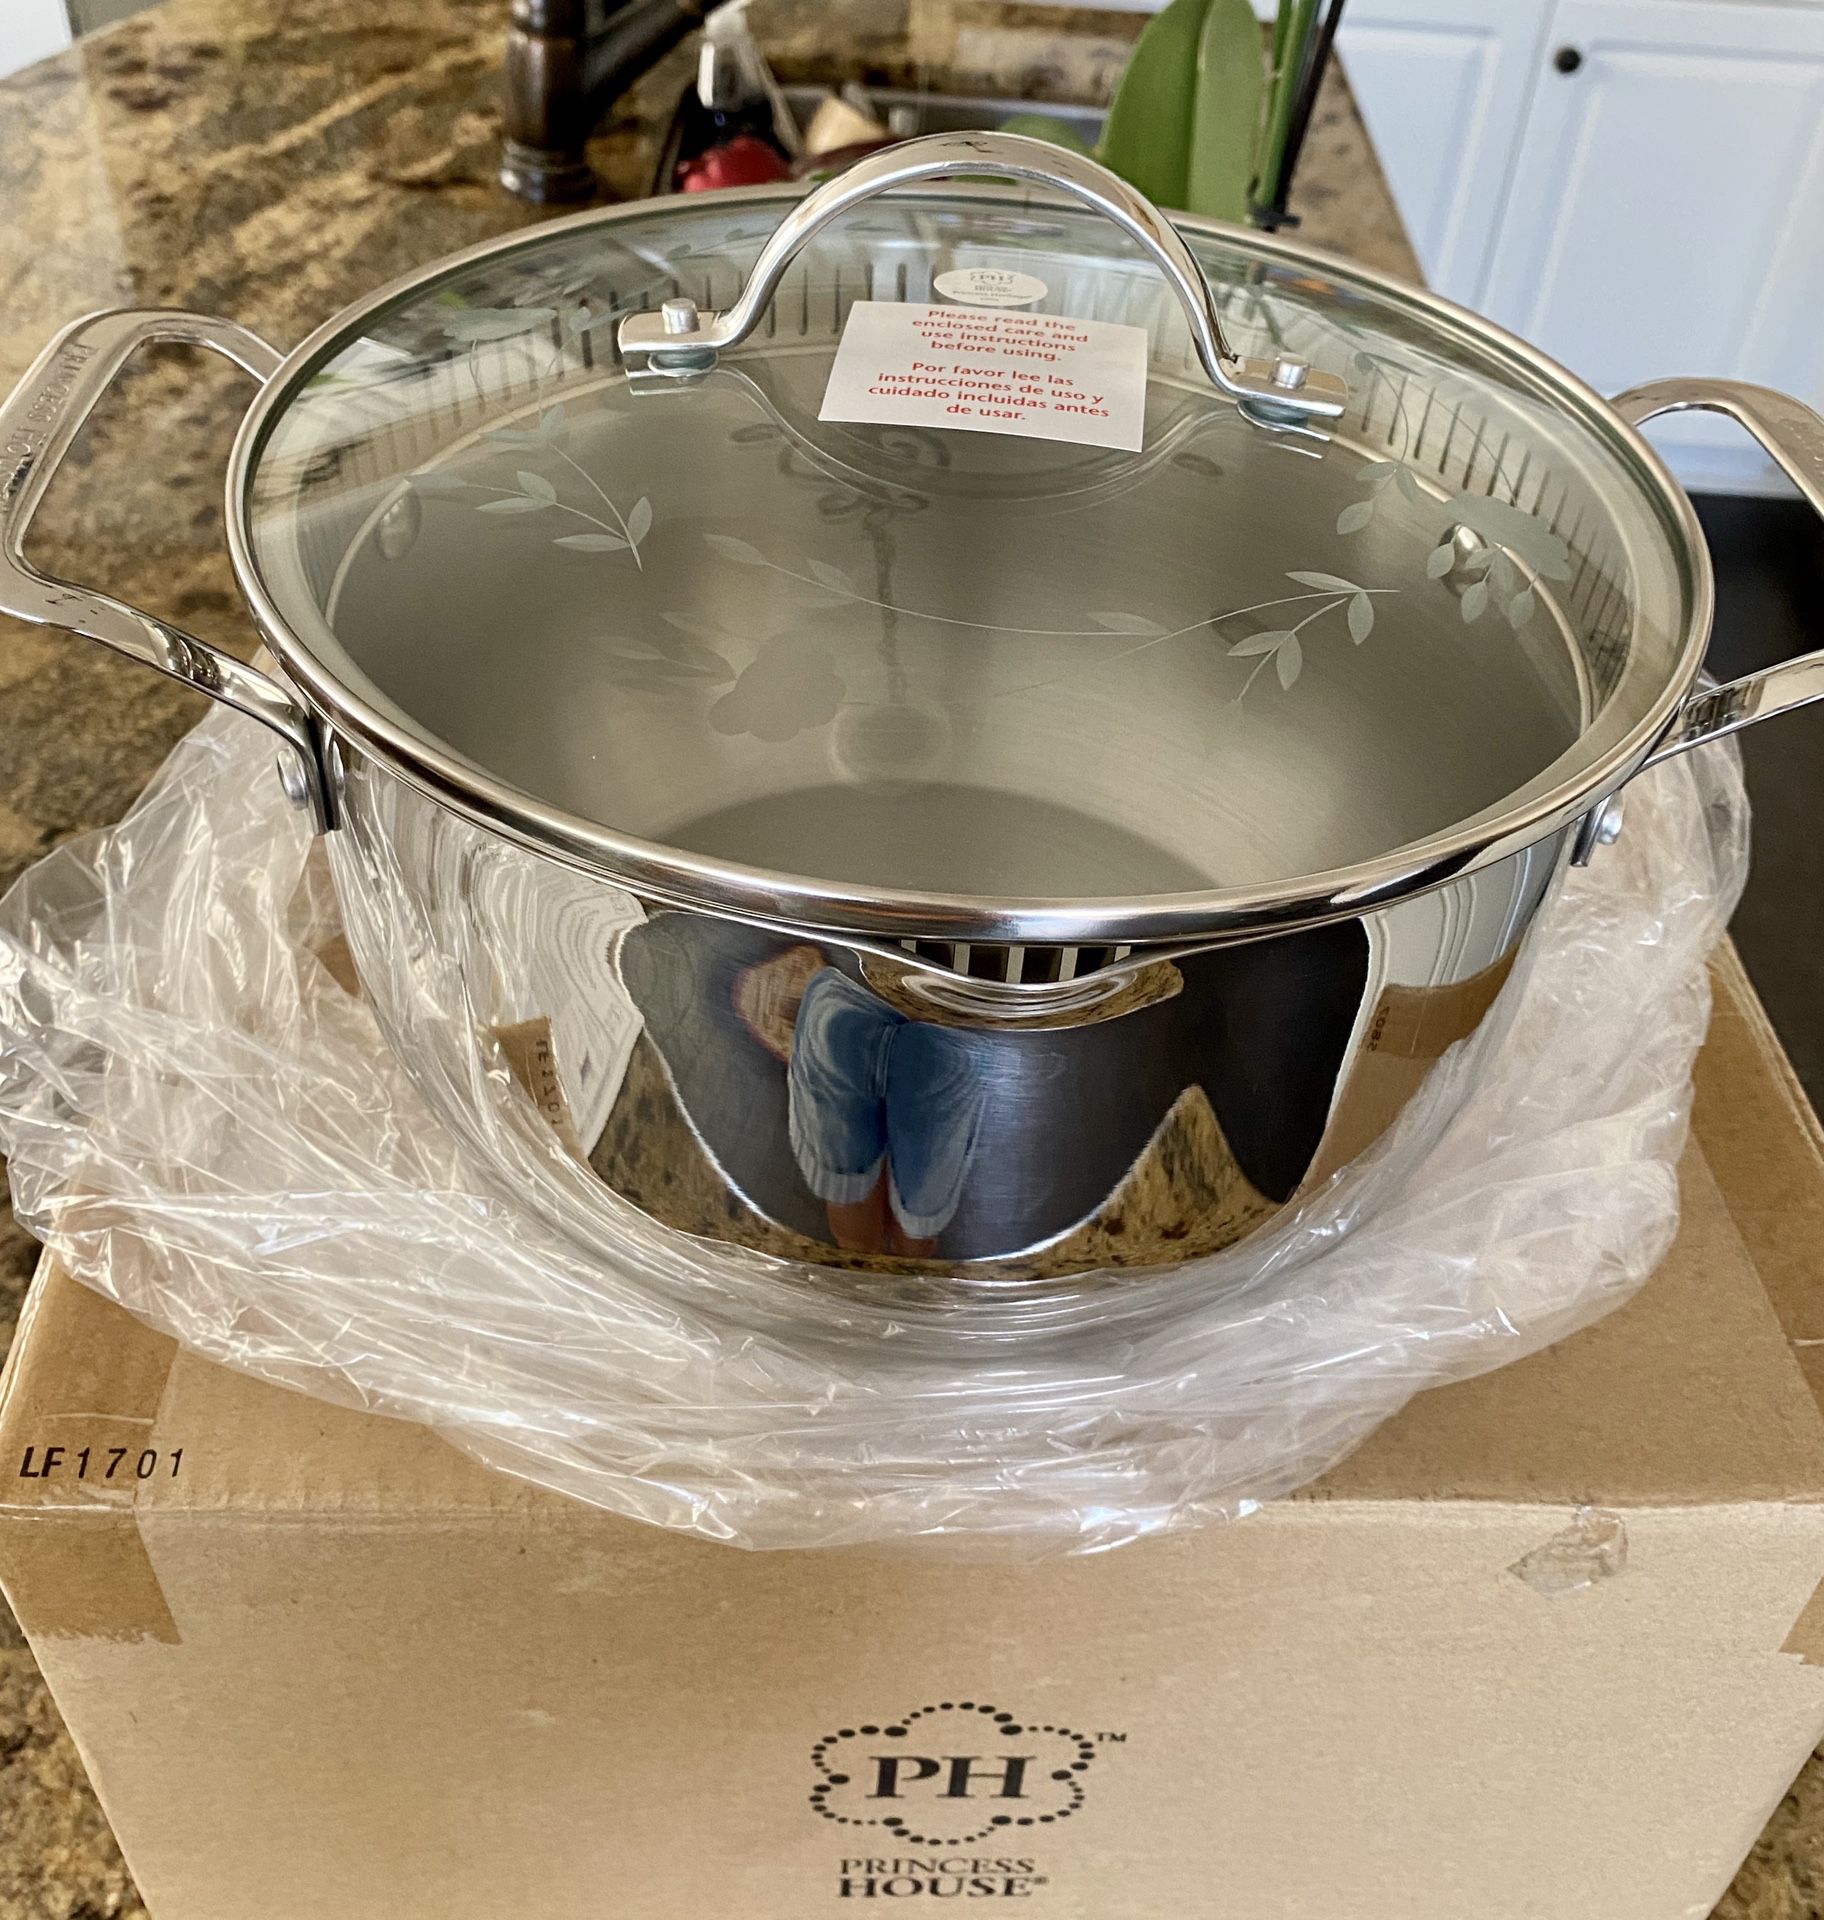 Princess House *Heritage Stainless Steel Classic 4.5 qt Straining Pot  (5807) for Sale in San Diego, CA - OfferUp